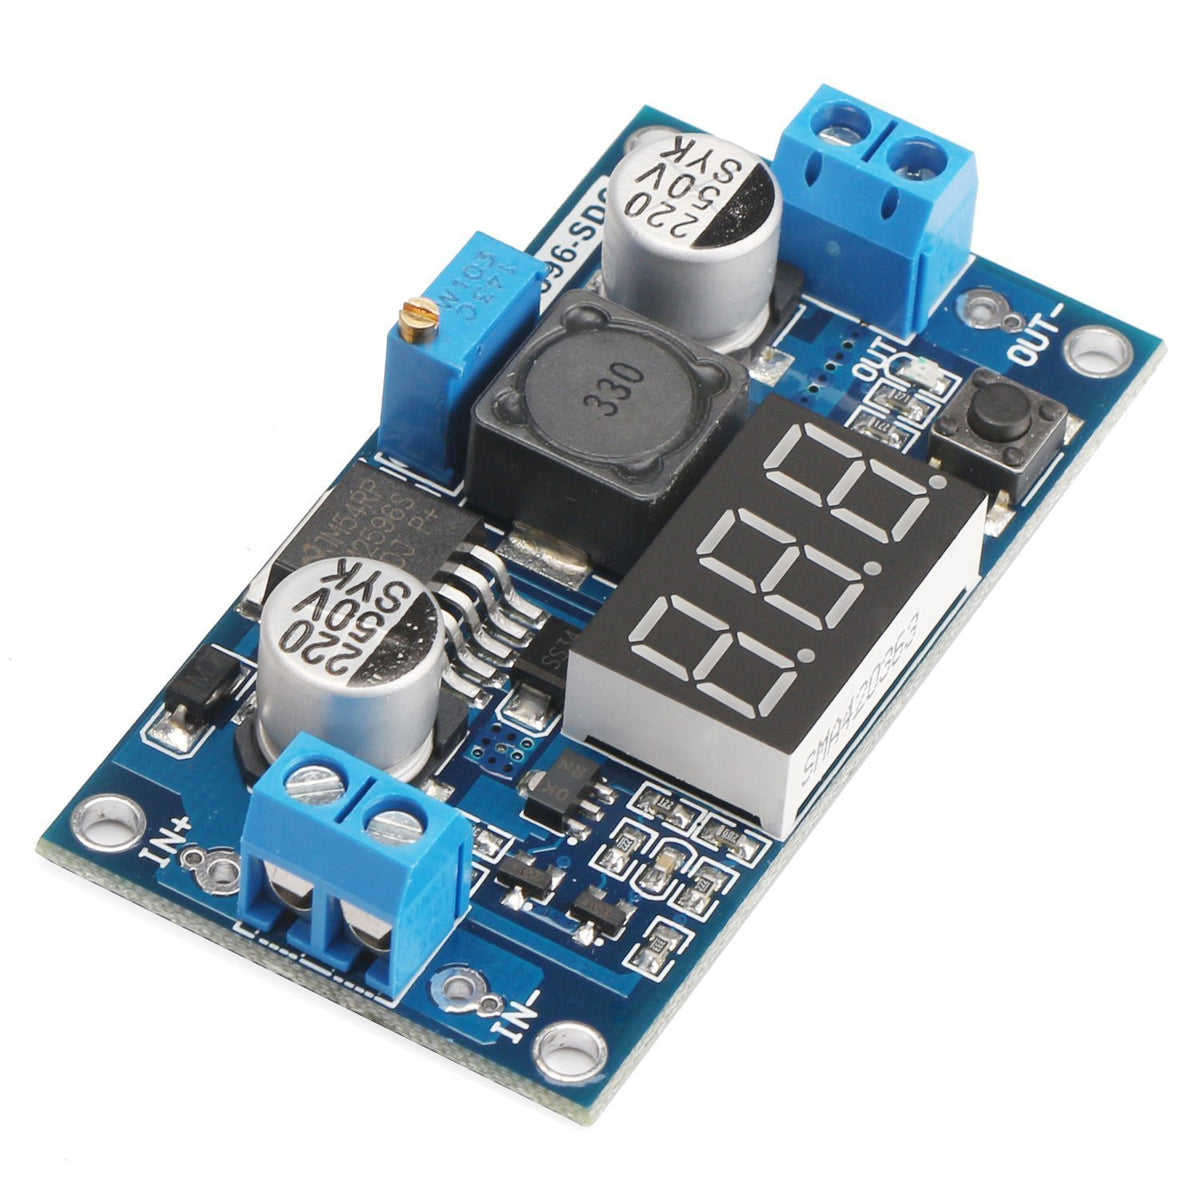 LM2596 DC-DC 4V-40V In / 1.3V to 35V Out 3A Buck Step Down Voltage  Converter Module with Voltmeter